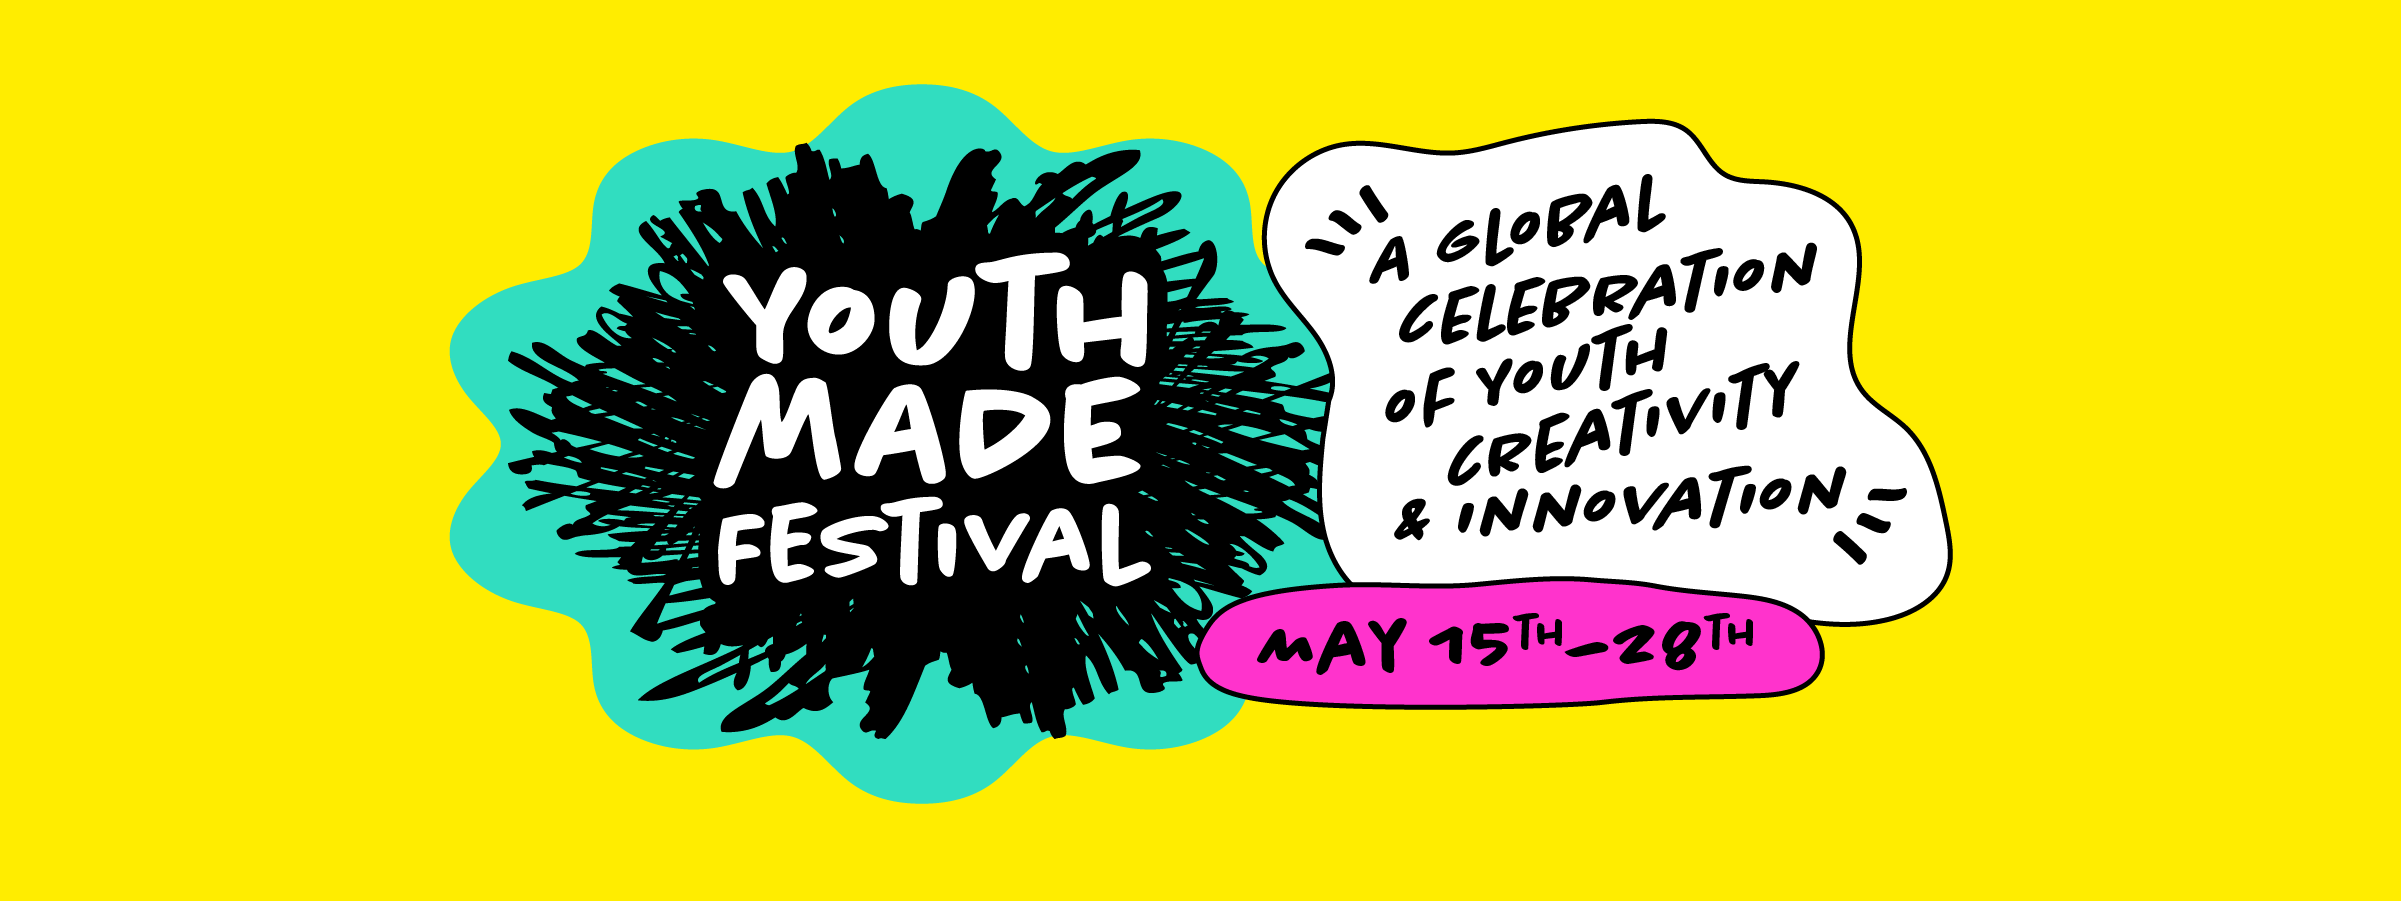 The YouthMADE Festival is a Global Celebration of Youth Creativity and Innovation from May 15-28, 2023